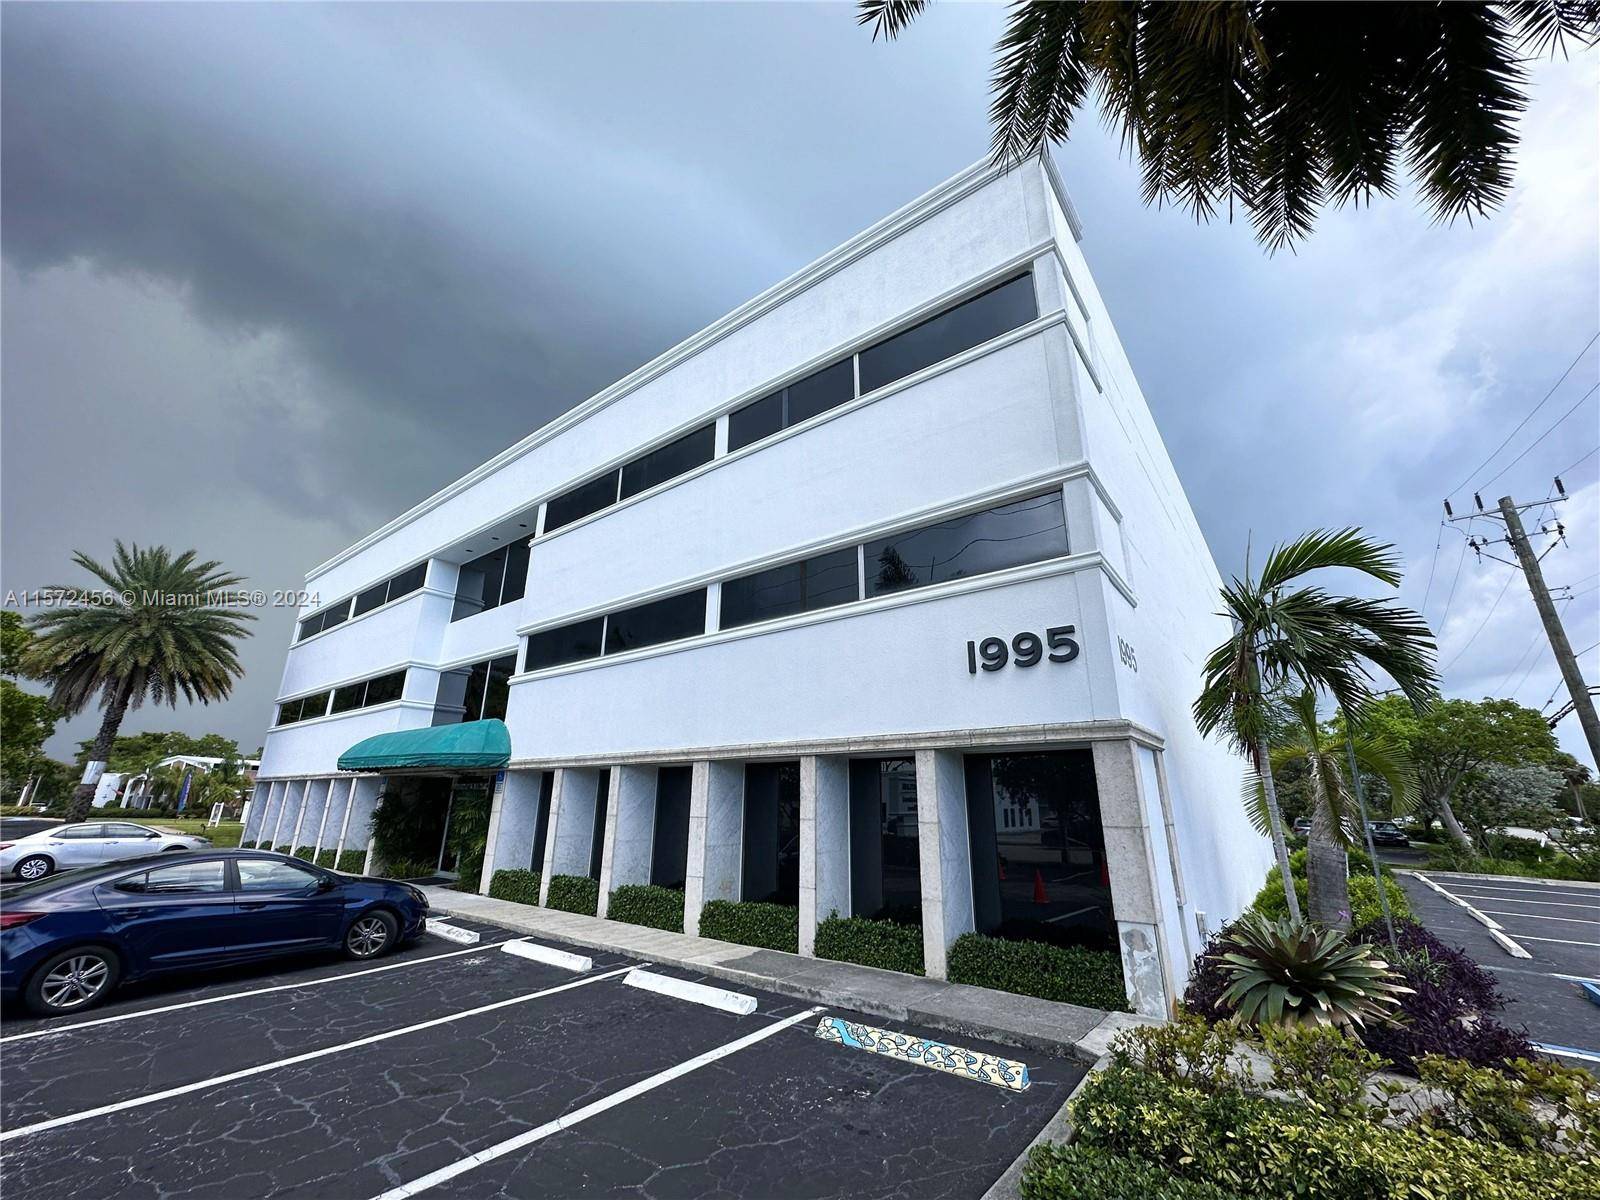 Situated at 1995 E Oakland Park Blvd, Oakland Park, FL 33306, this office building holds tremendous potential for an impressive redevelopment project.